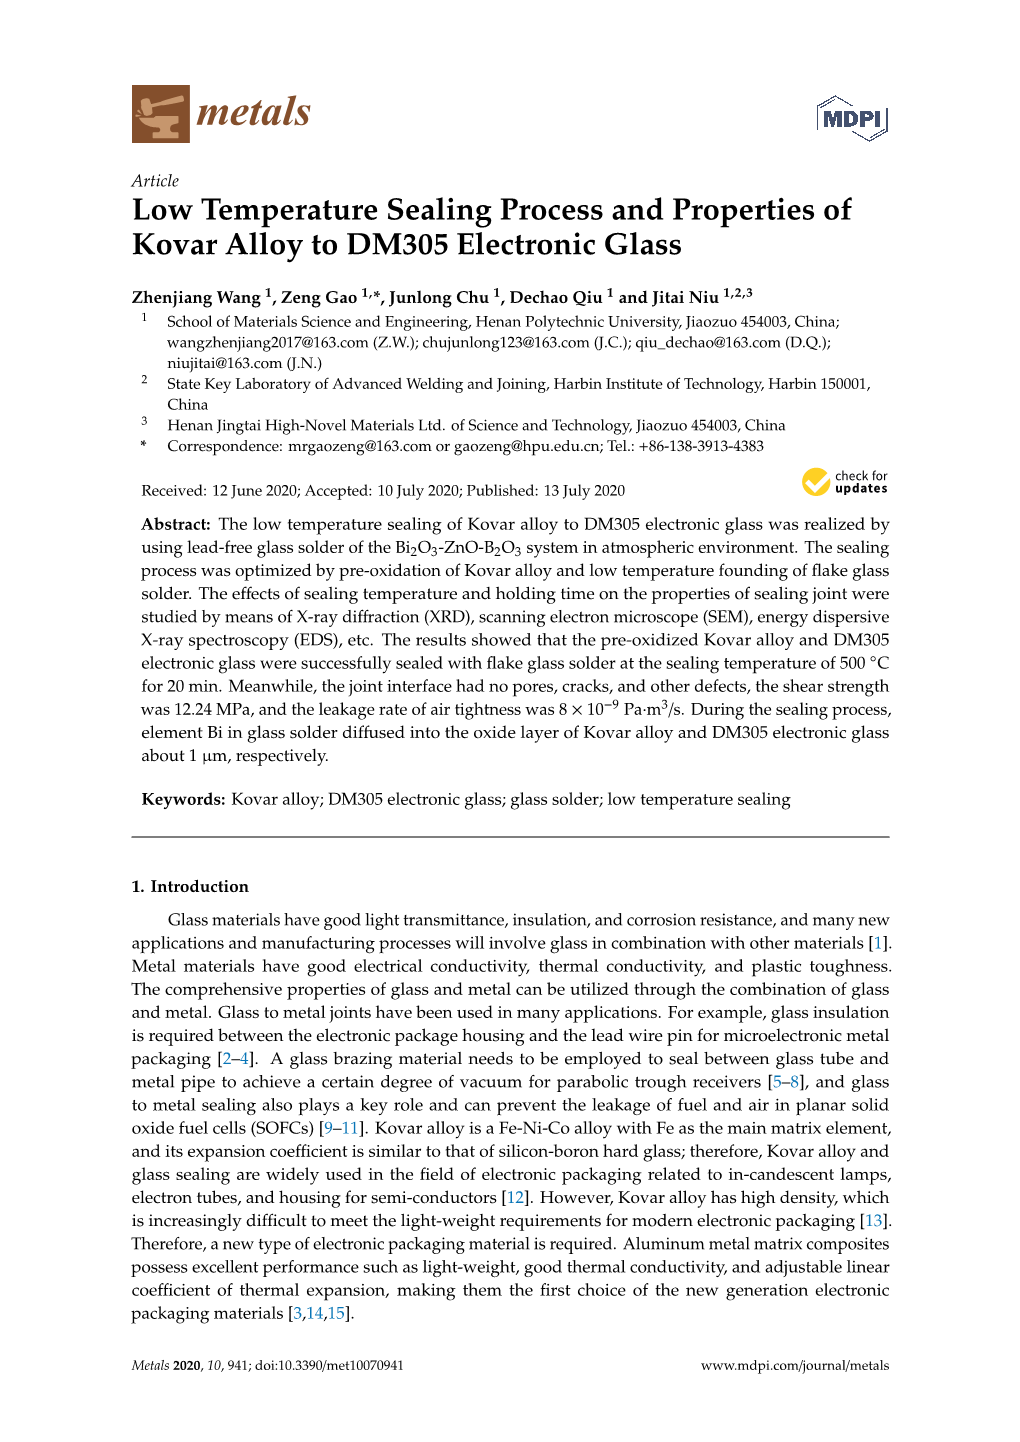 Low Temperature Sealing Process and Properties of Kovar Alloy to DM305 Electronic Glass